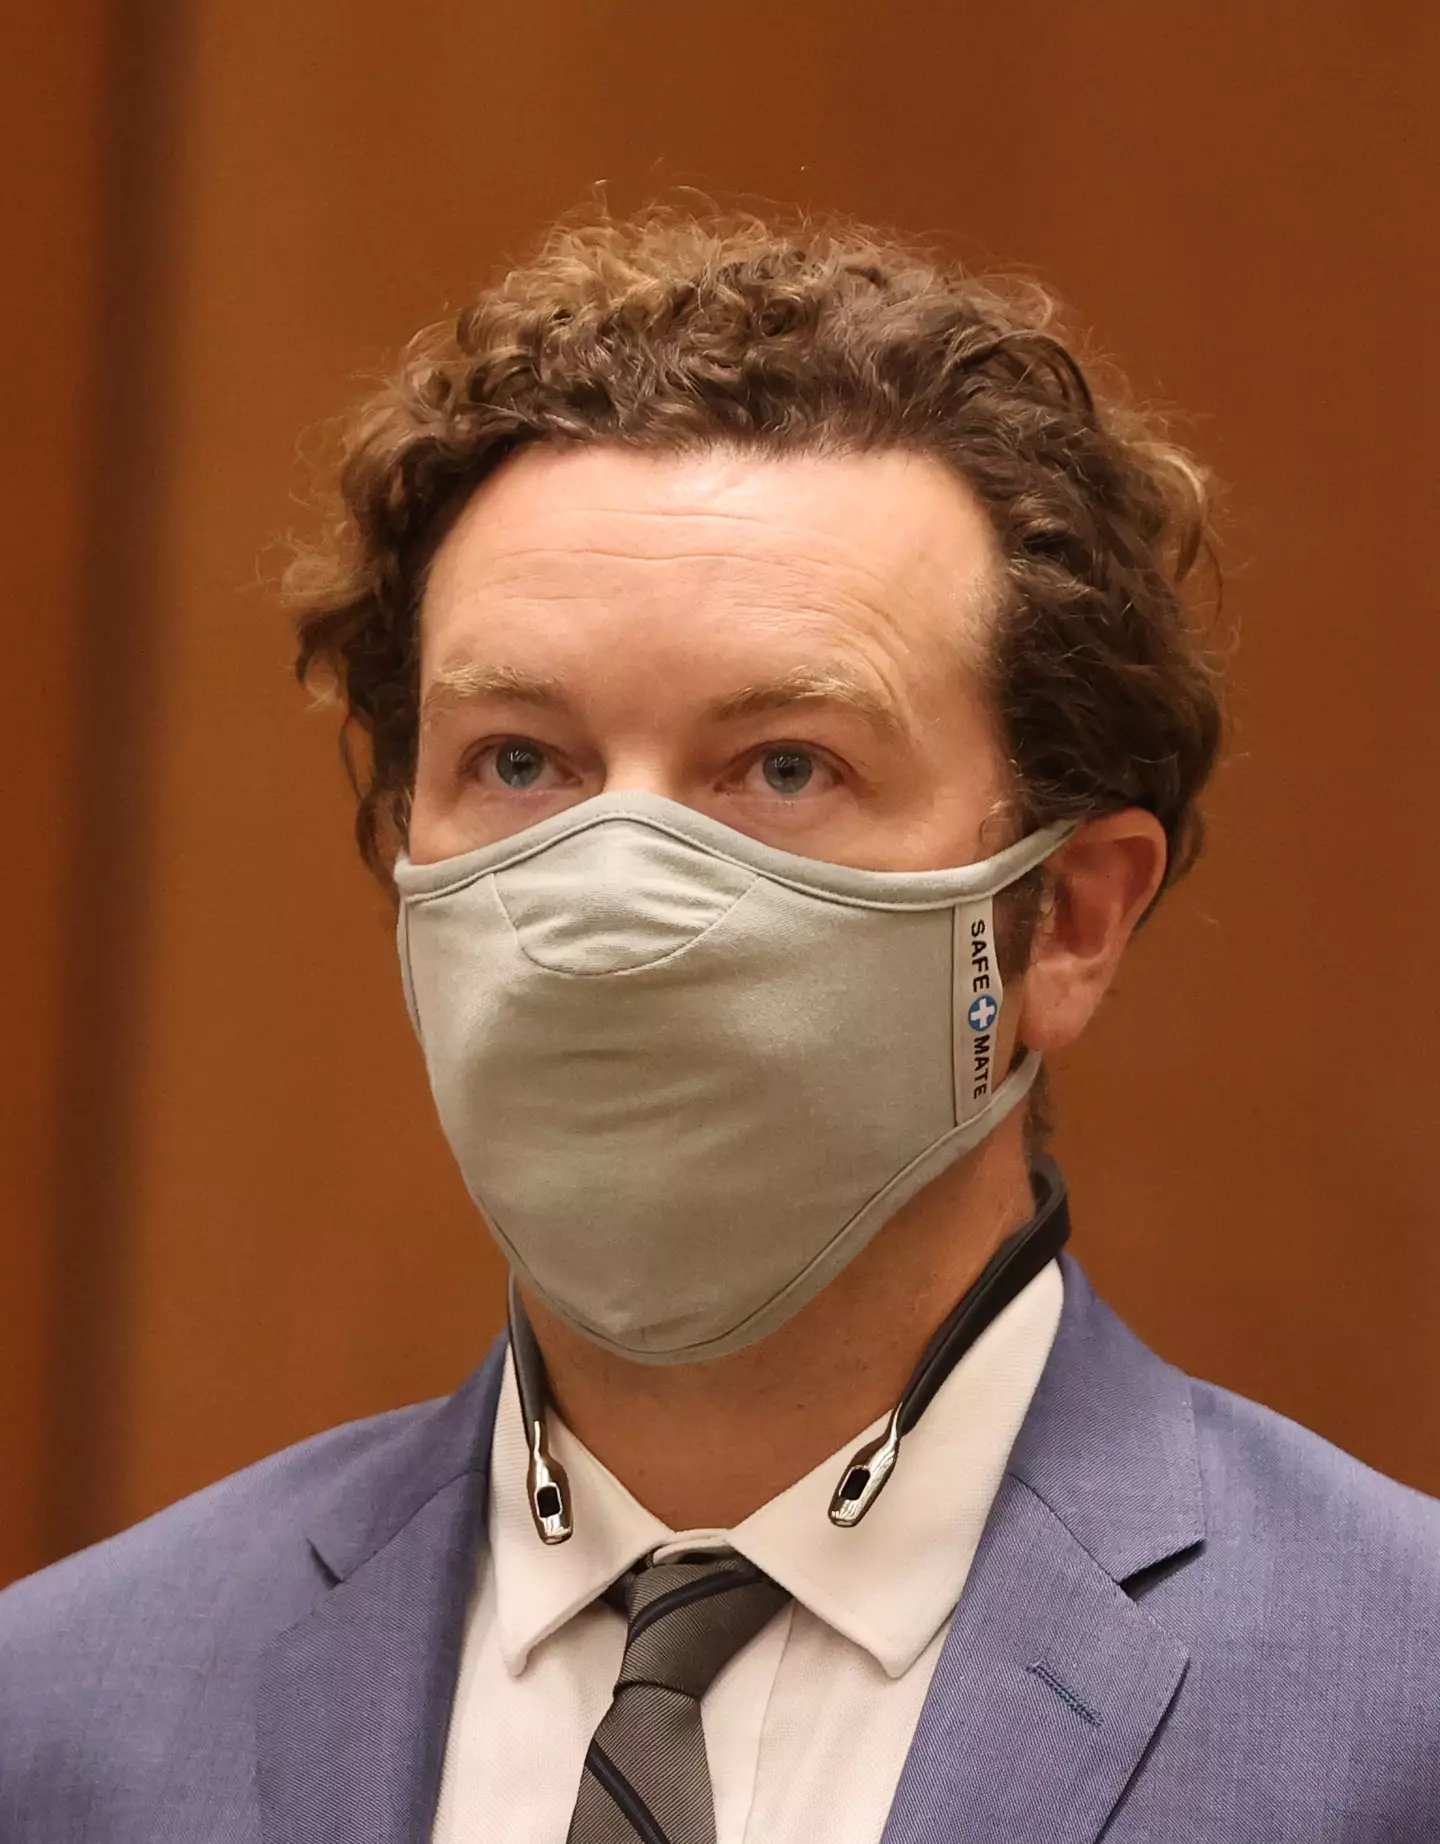 Danny Masterson was sentenced to 30 years in prison for rape.